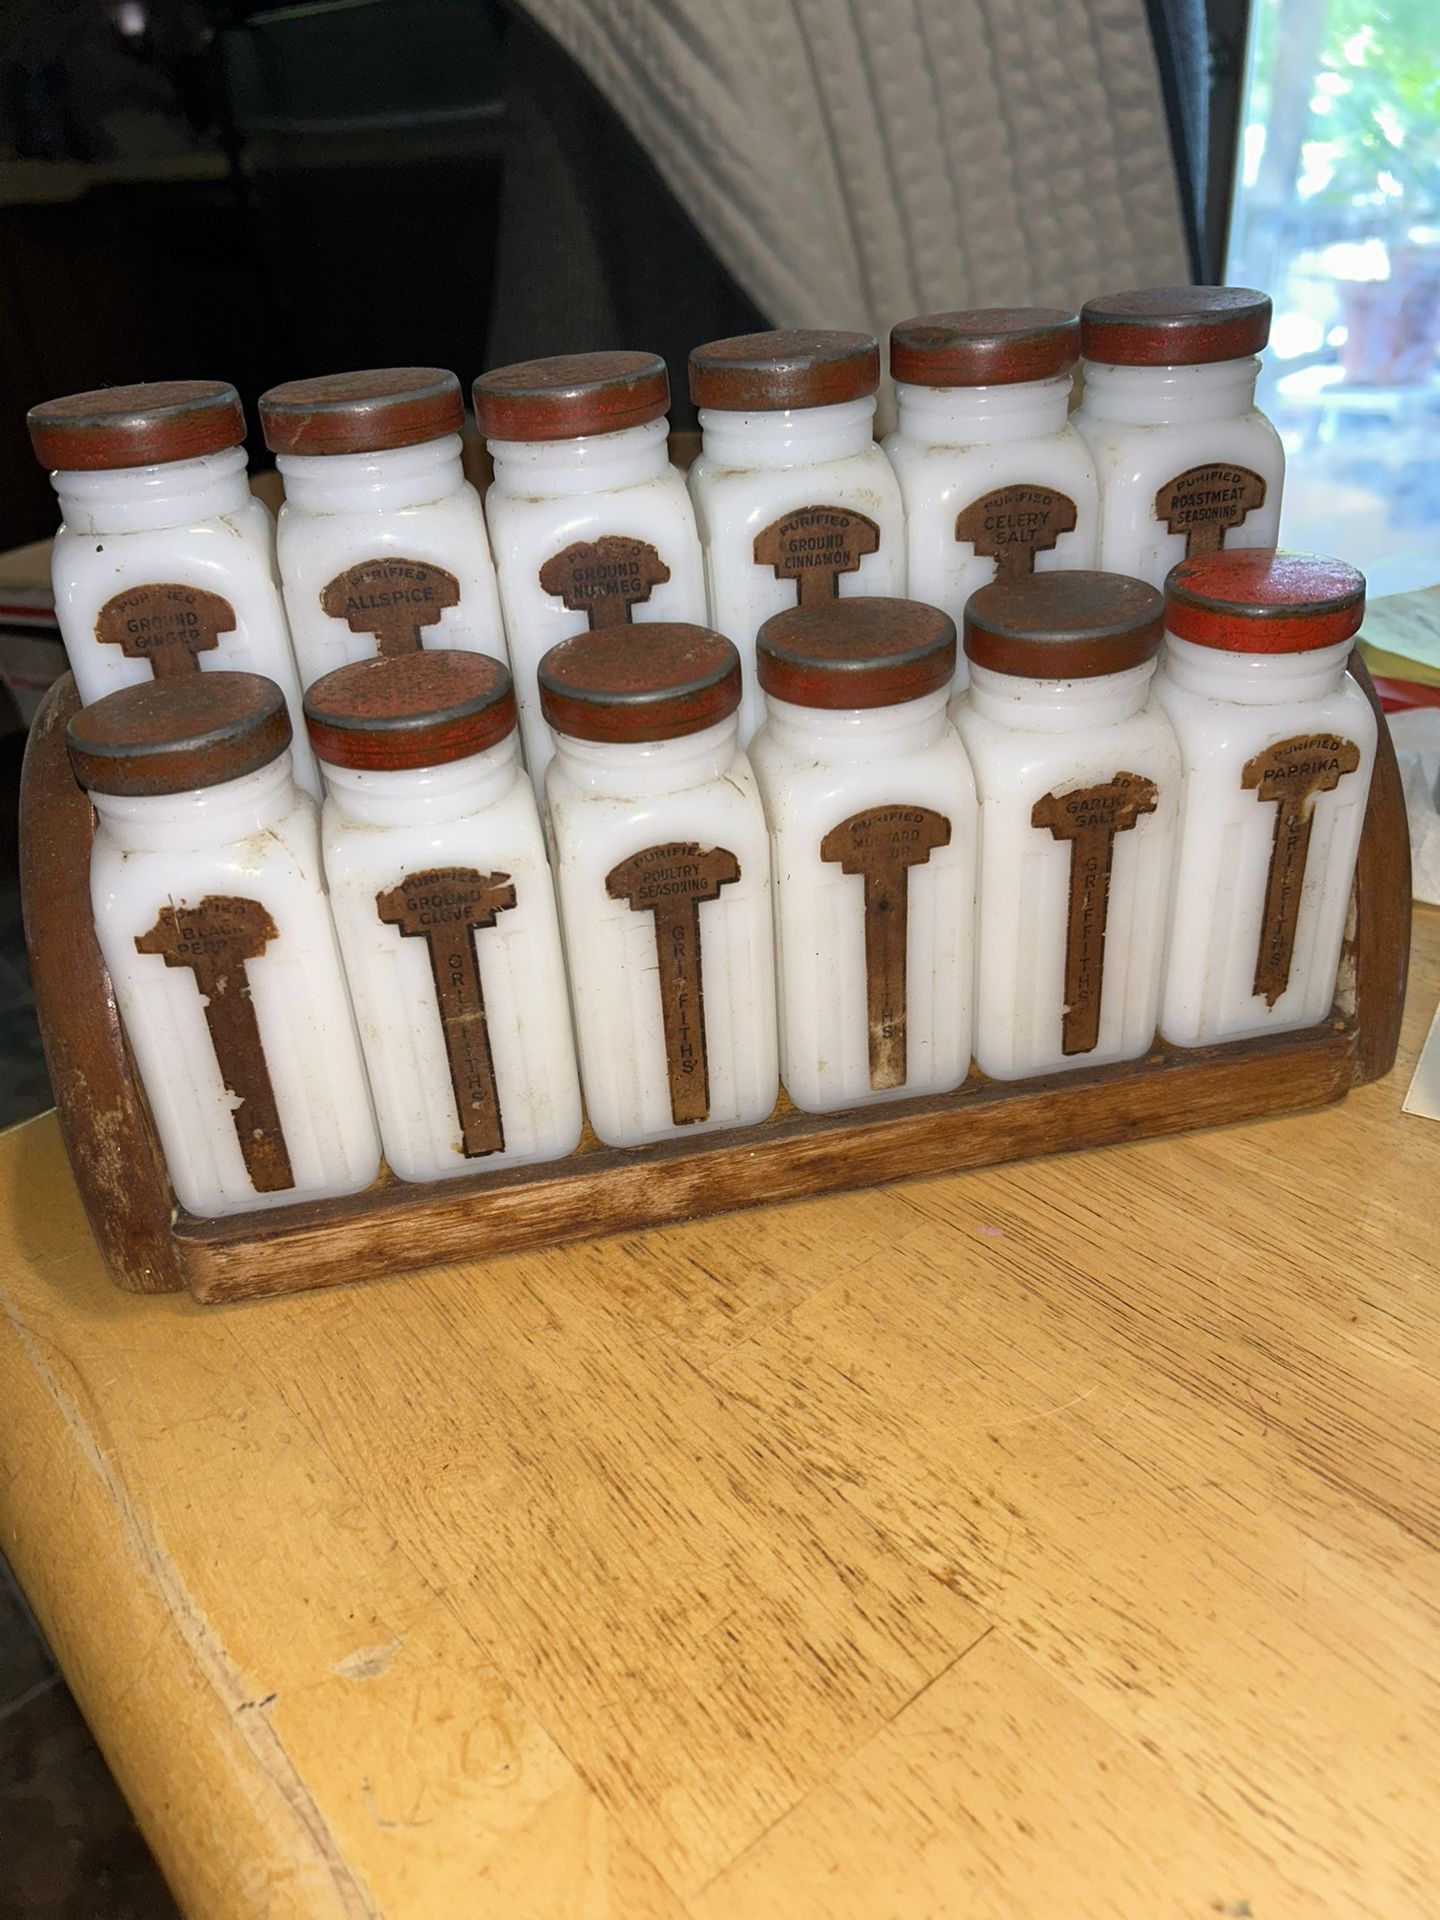 BNIB Kamenstein Spice Rack 20 Jars Model #(contact info removed) for Sale  in North Prince George, VA - OfferUp